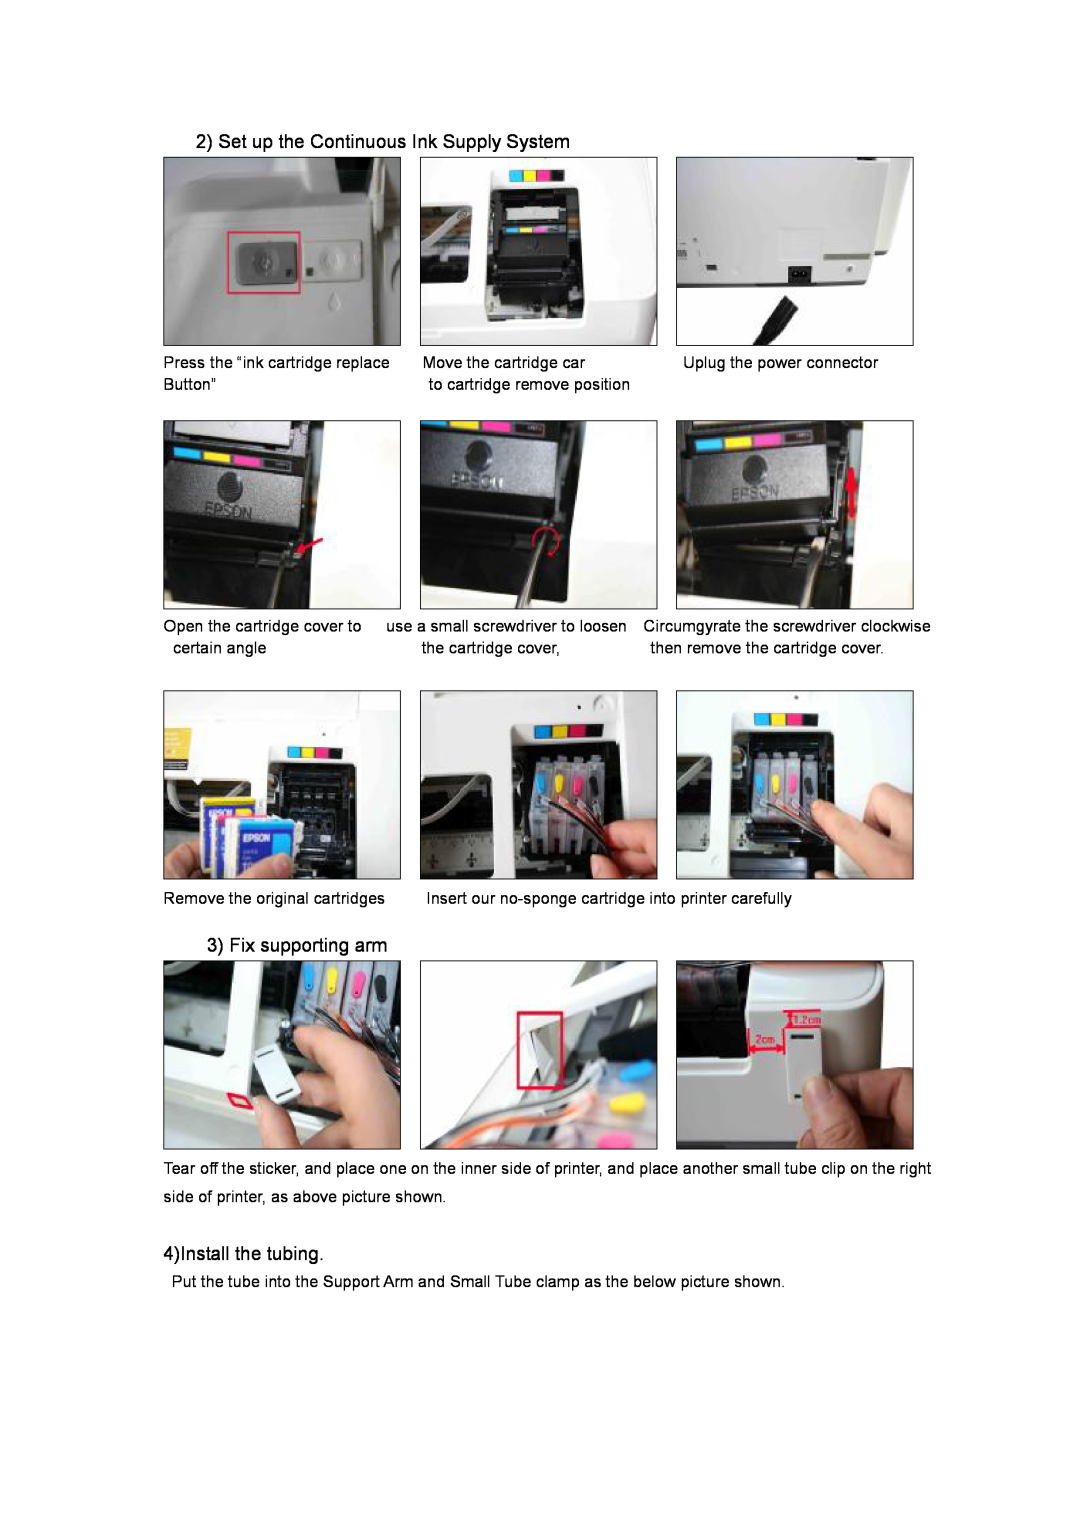 Epson c58 manual Set up the Continuous Ink Supply System, Fix supporting arm, 4Install the tubing 